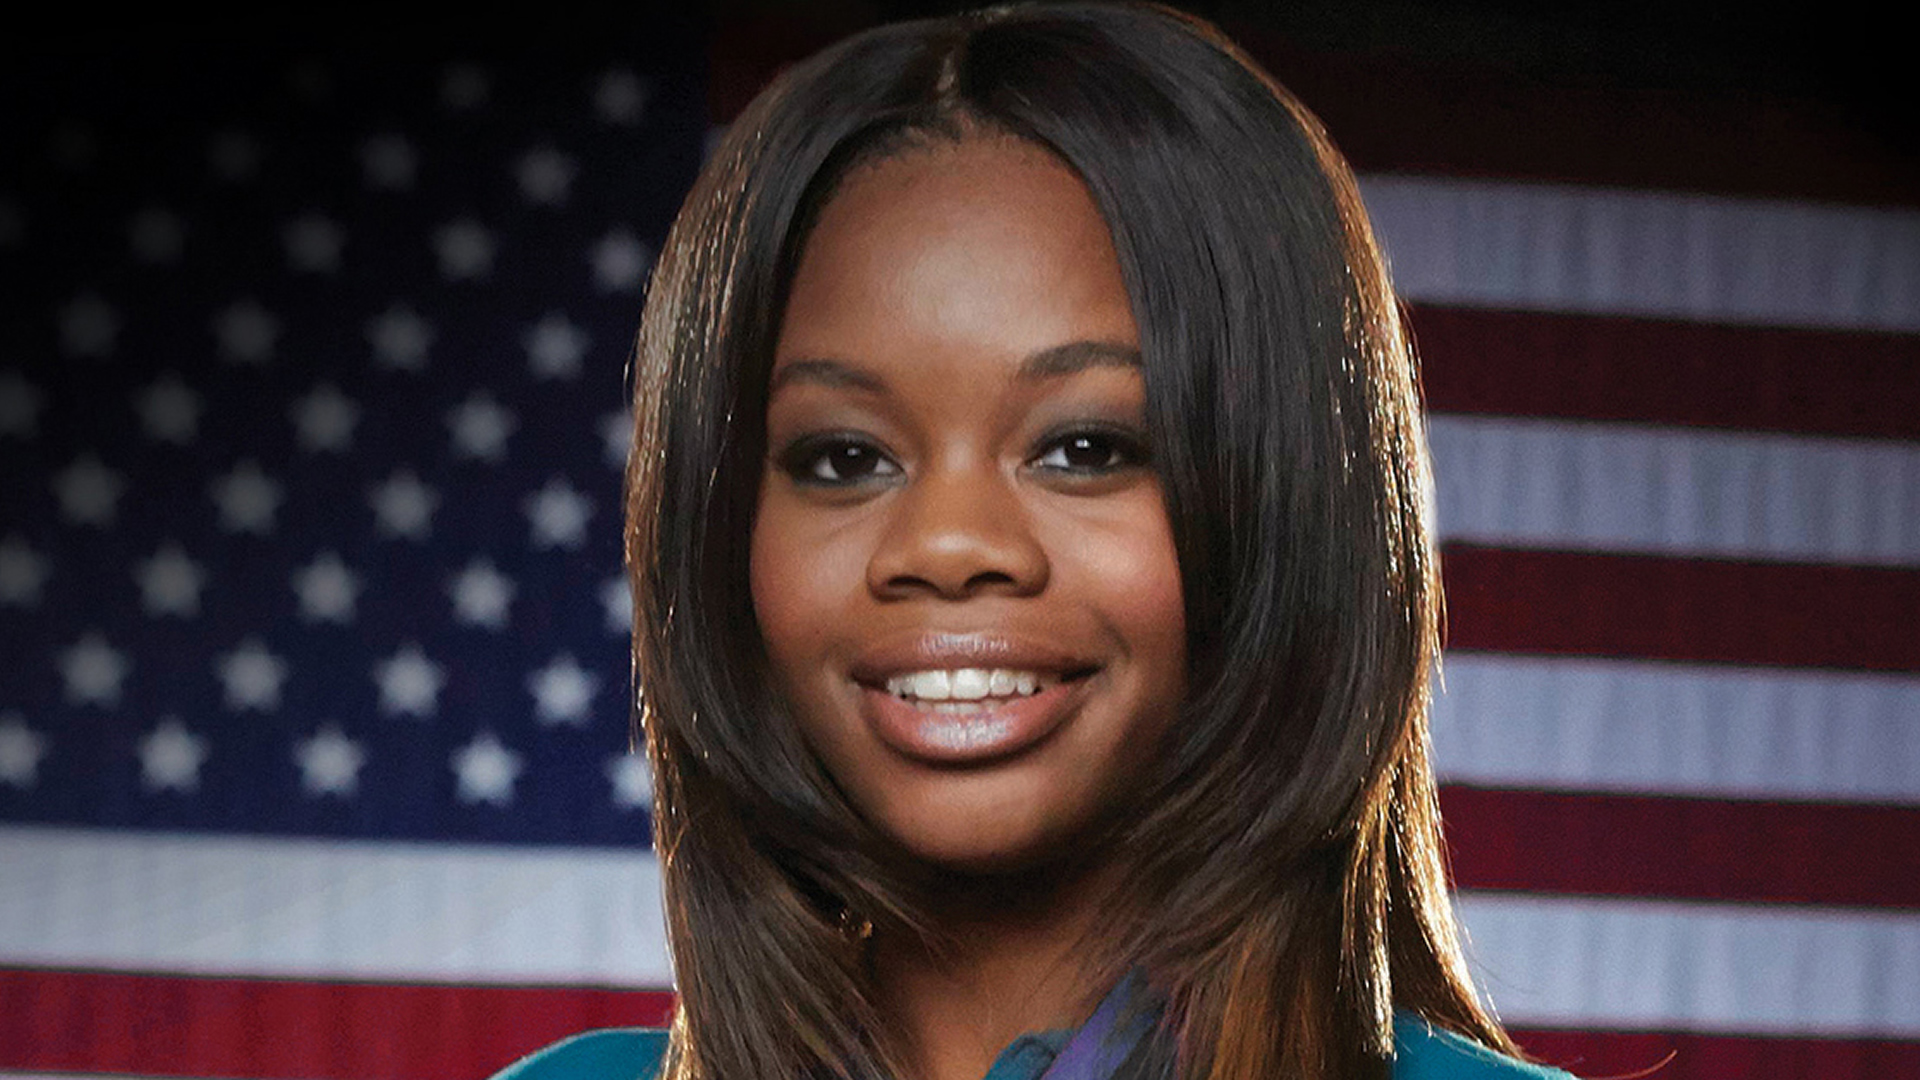 Find out more about Gabby Douglas and the rest of the cast on Lifetime. 